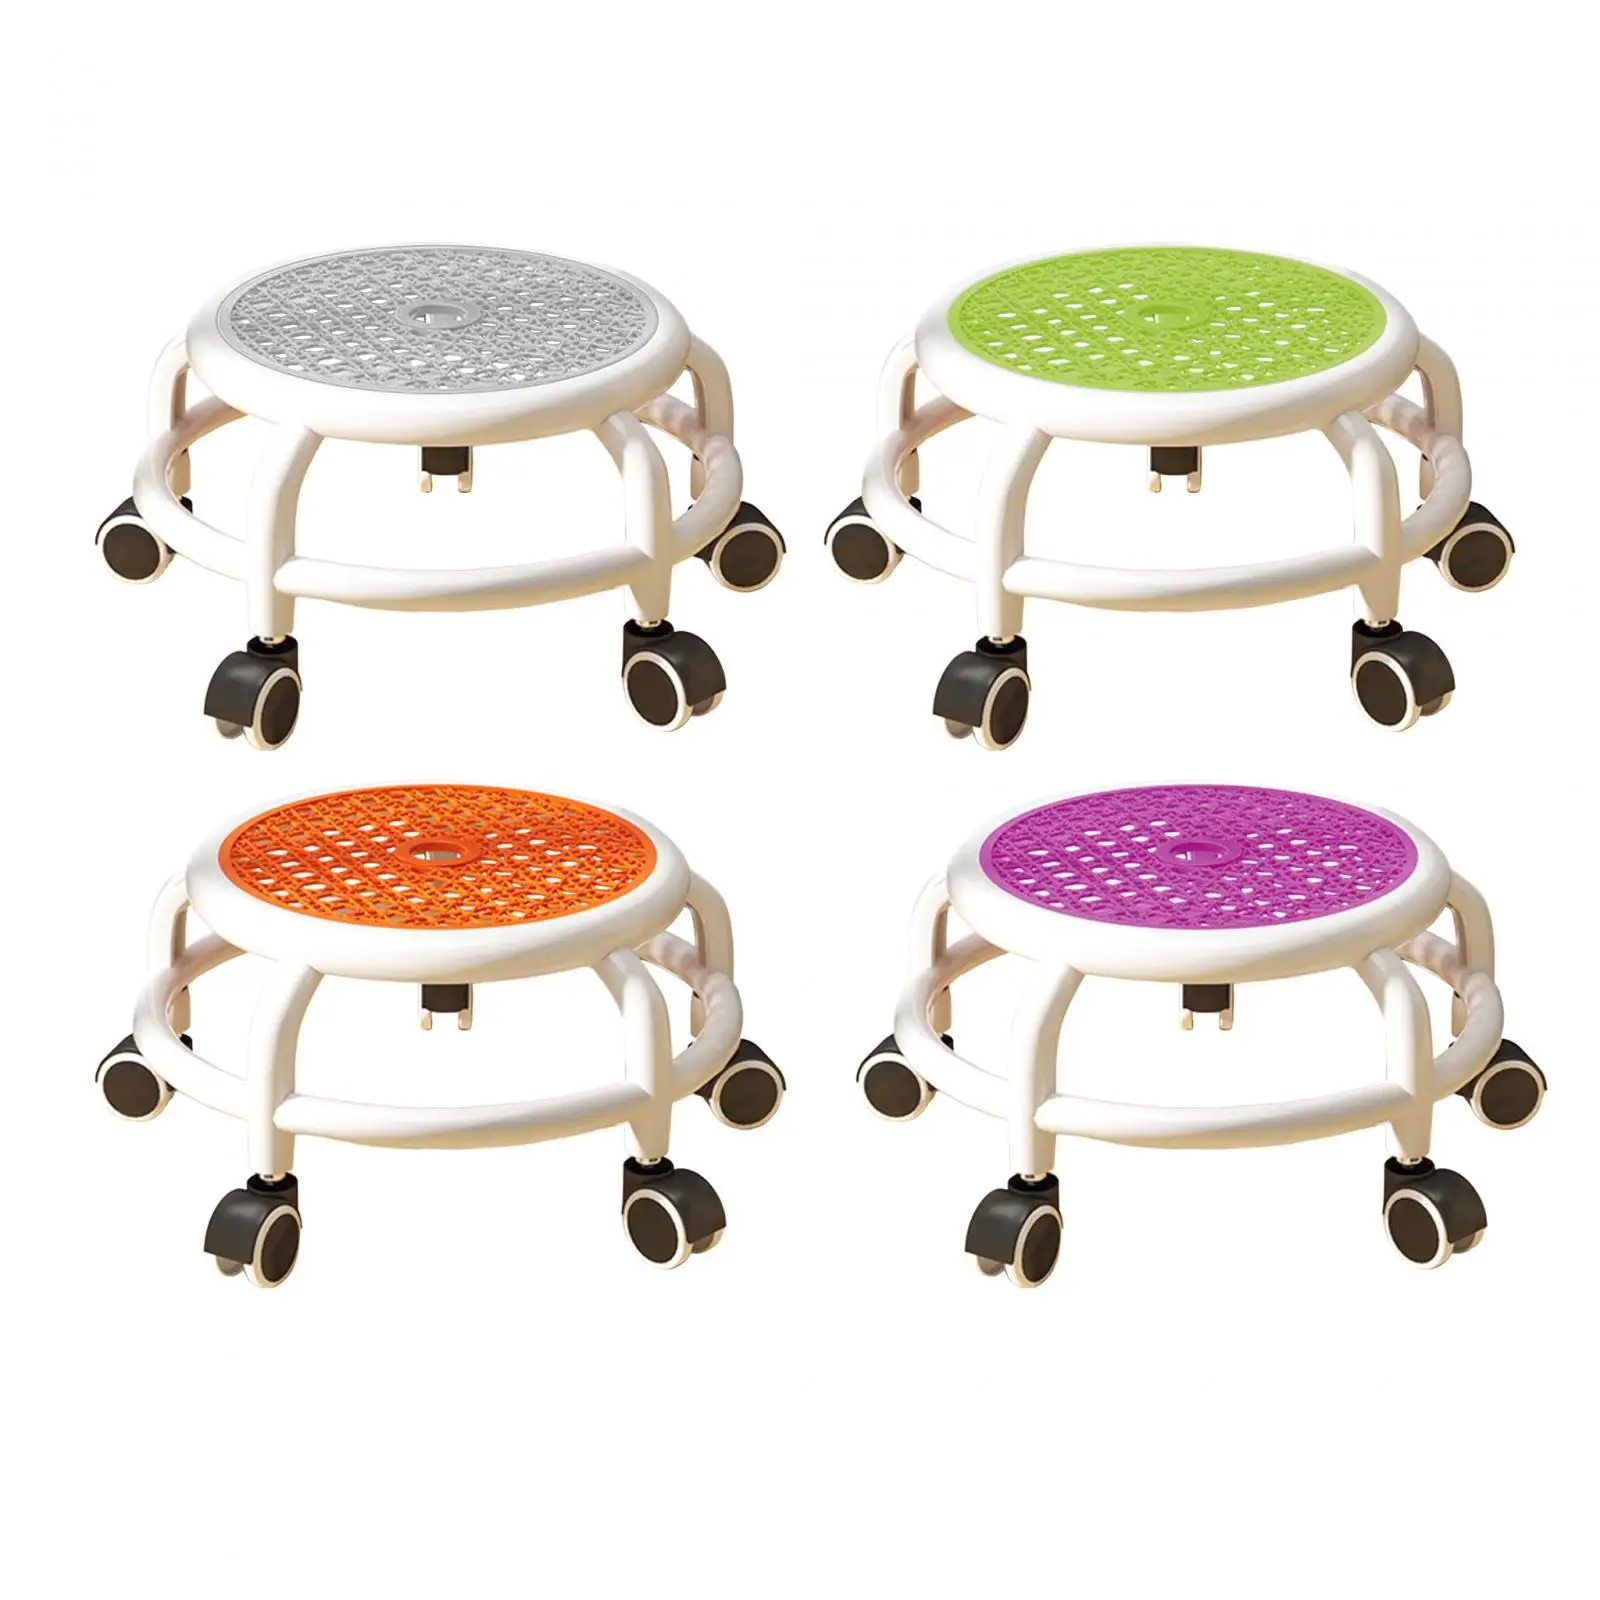 

Pedicure Stool Heavy Duty Movable Footstool 360° Rotating Rolling Stool Low Roller Seat for Salons Barber Shop Fitness Garage